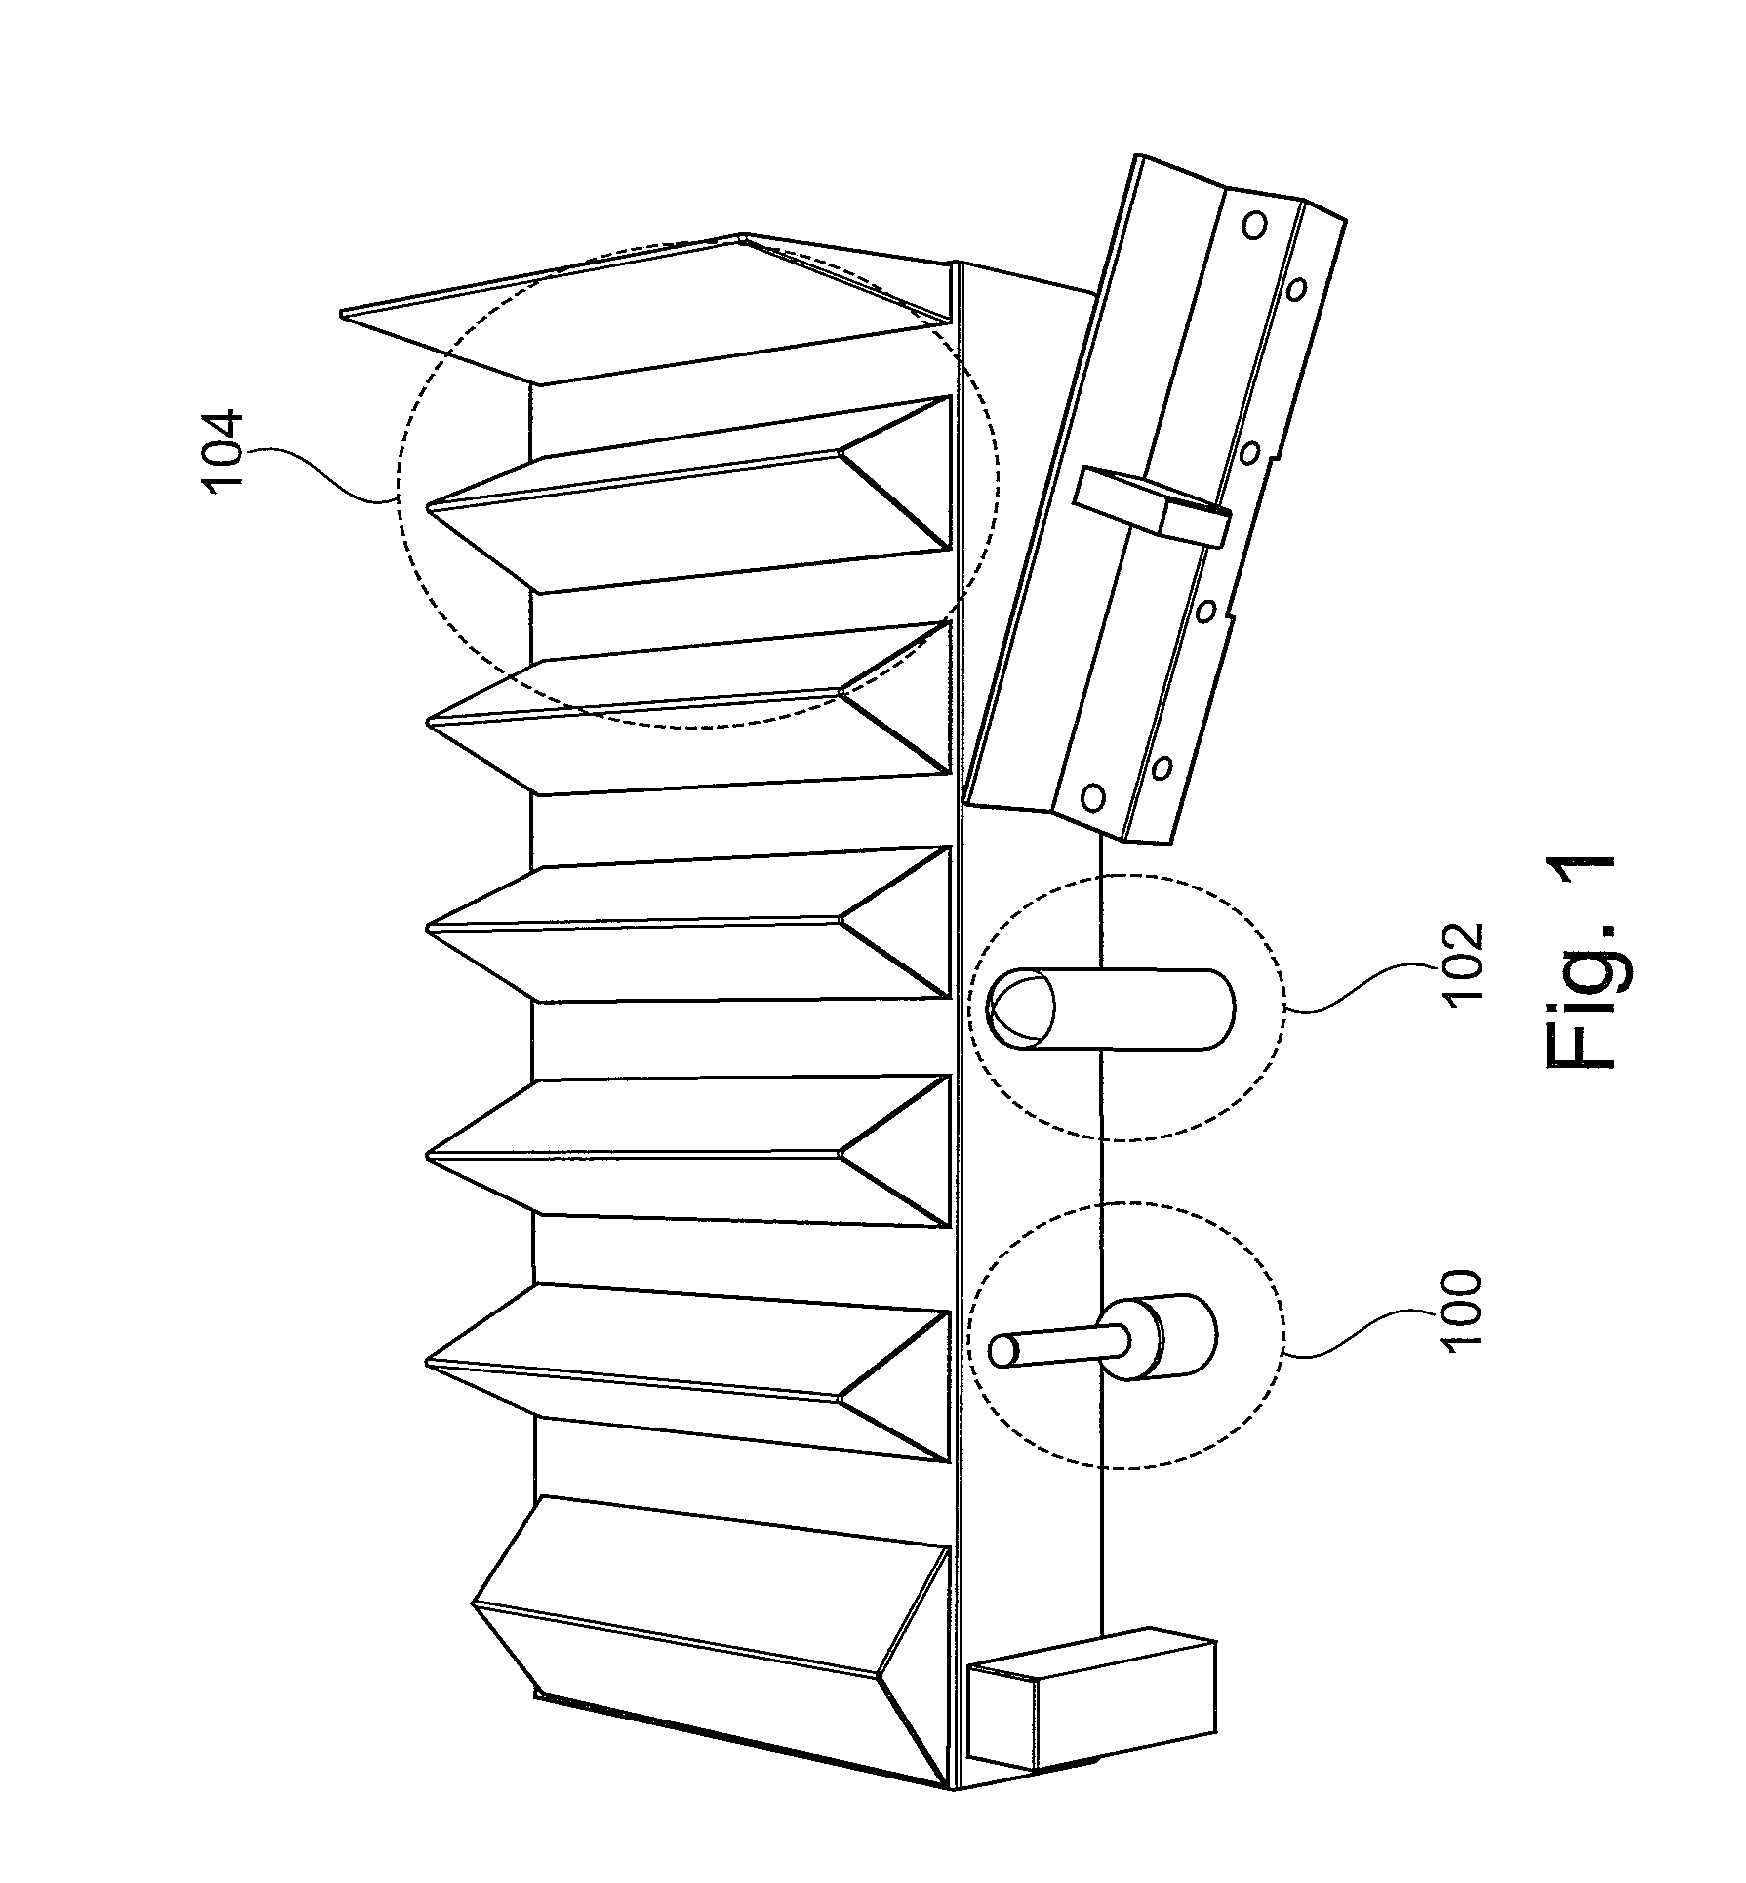 Method for controlling a robot device, robot device and computer program product